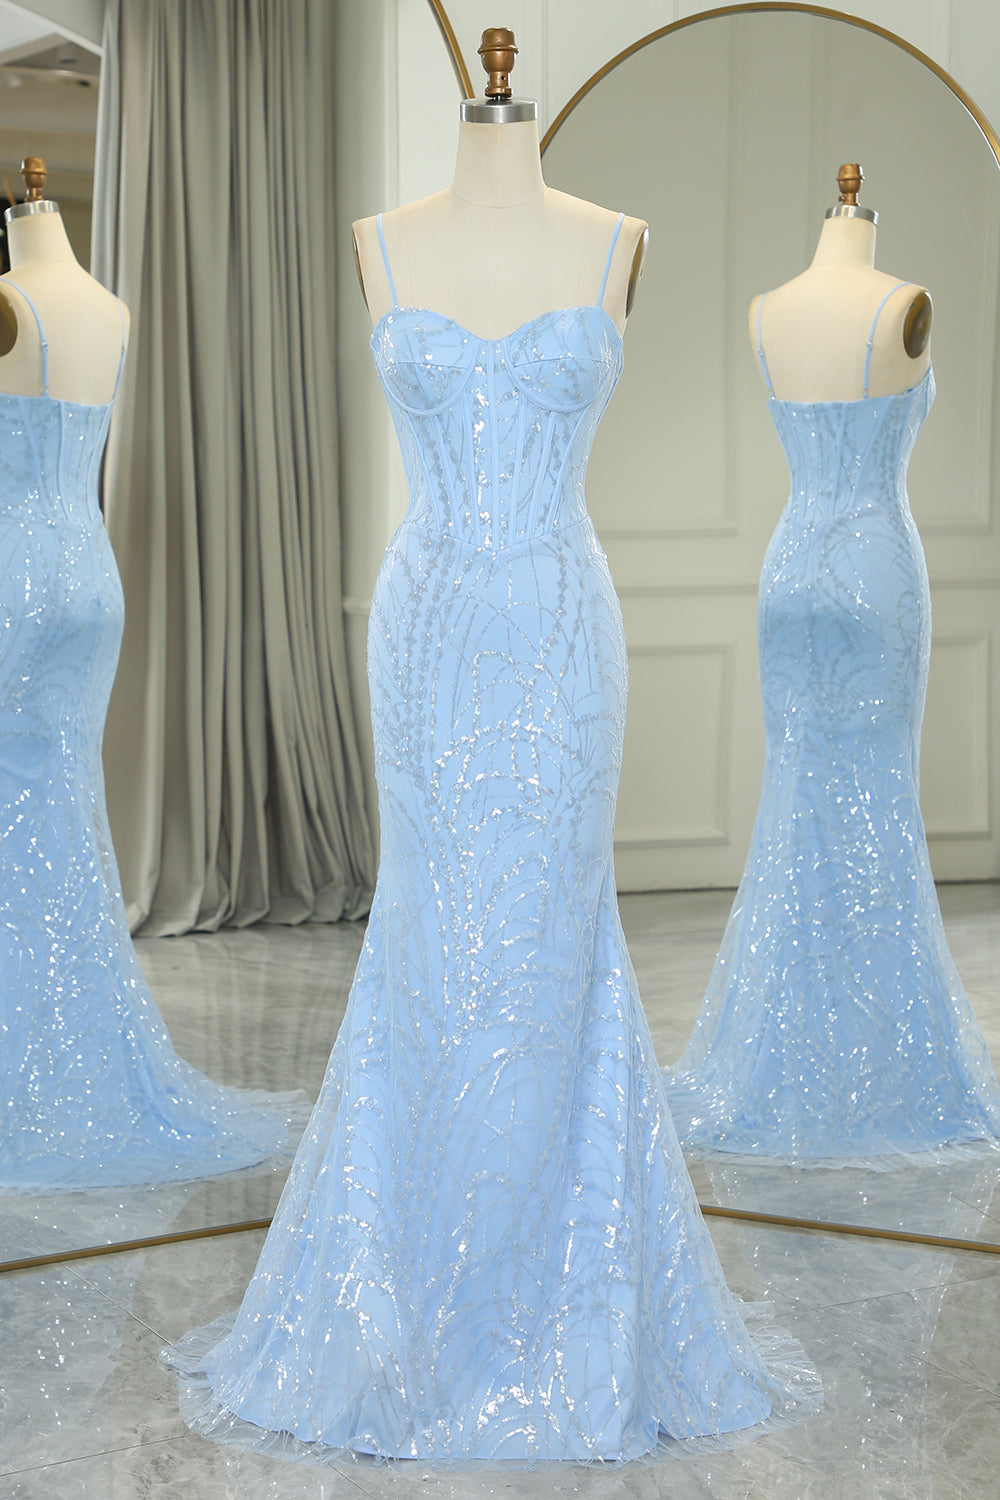 Light Blue Mermaid Spaghetti Straps Corset Long Prom Dress with Sequins